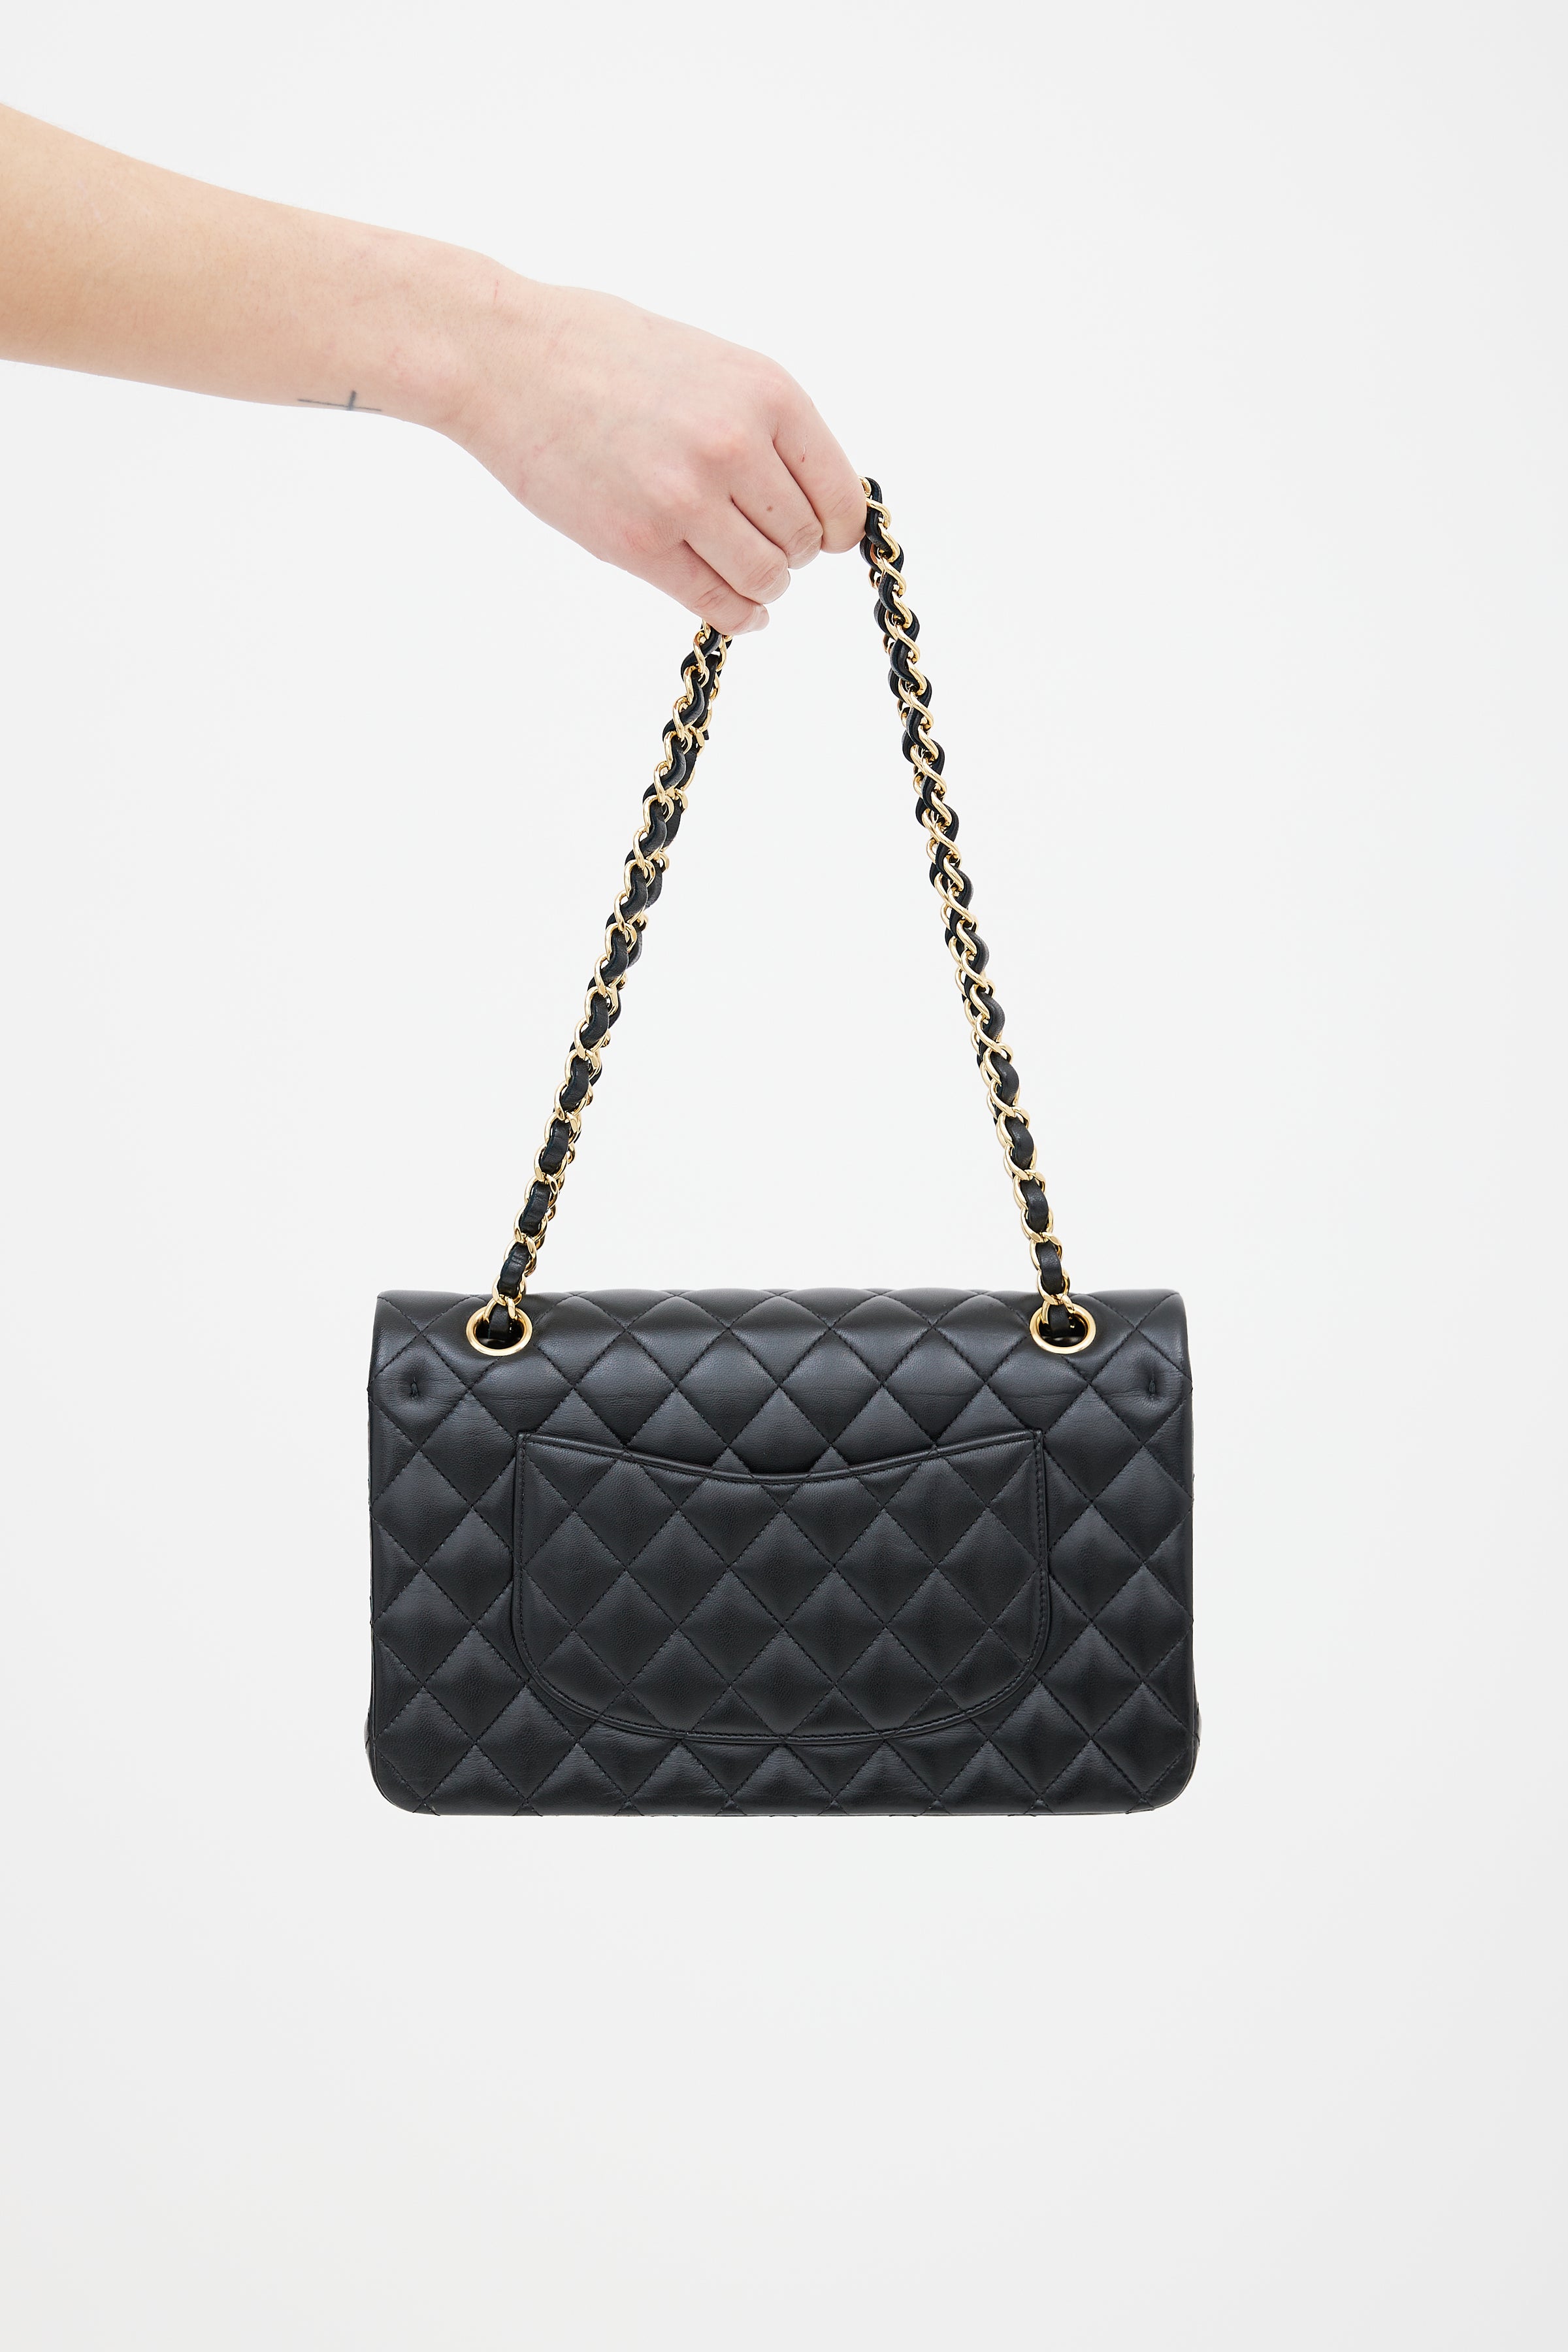 Chanel Classic Flap Bag Black Available in London 🇬🇧Pounds: £6,500 